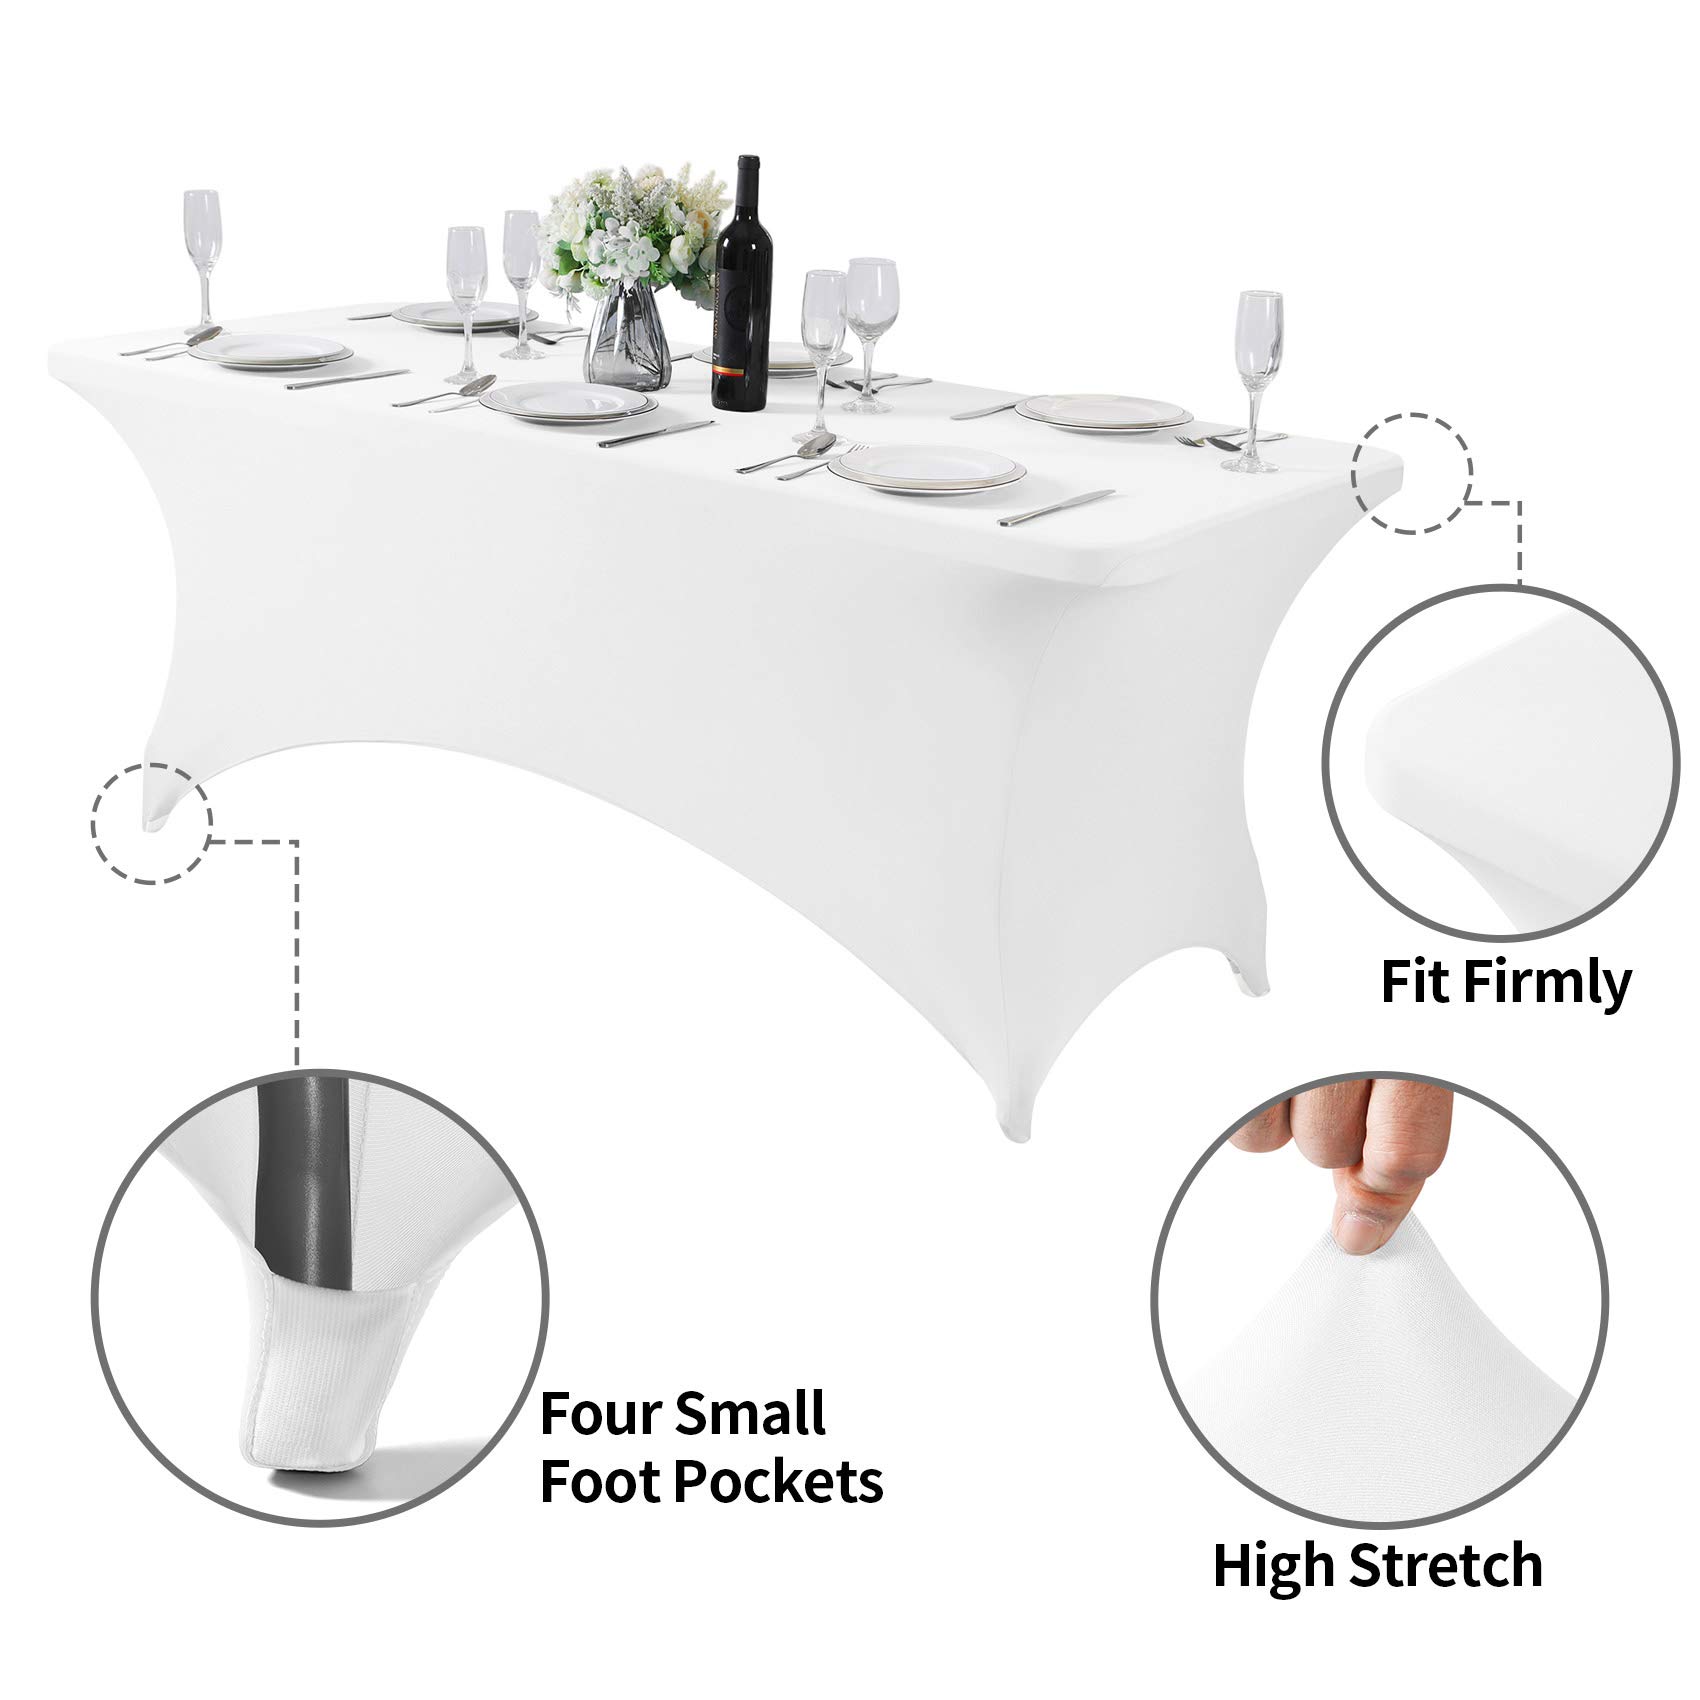 Hezuzo 2Pack Spandex Table Cover for 6Ft Table Universal Fitted Stretch Tablecloth for Party, Banquet, Wedding and Events-White